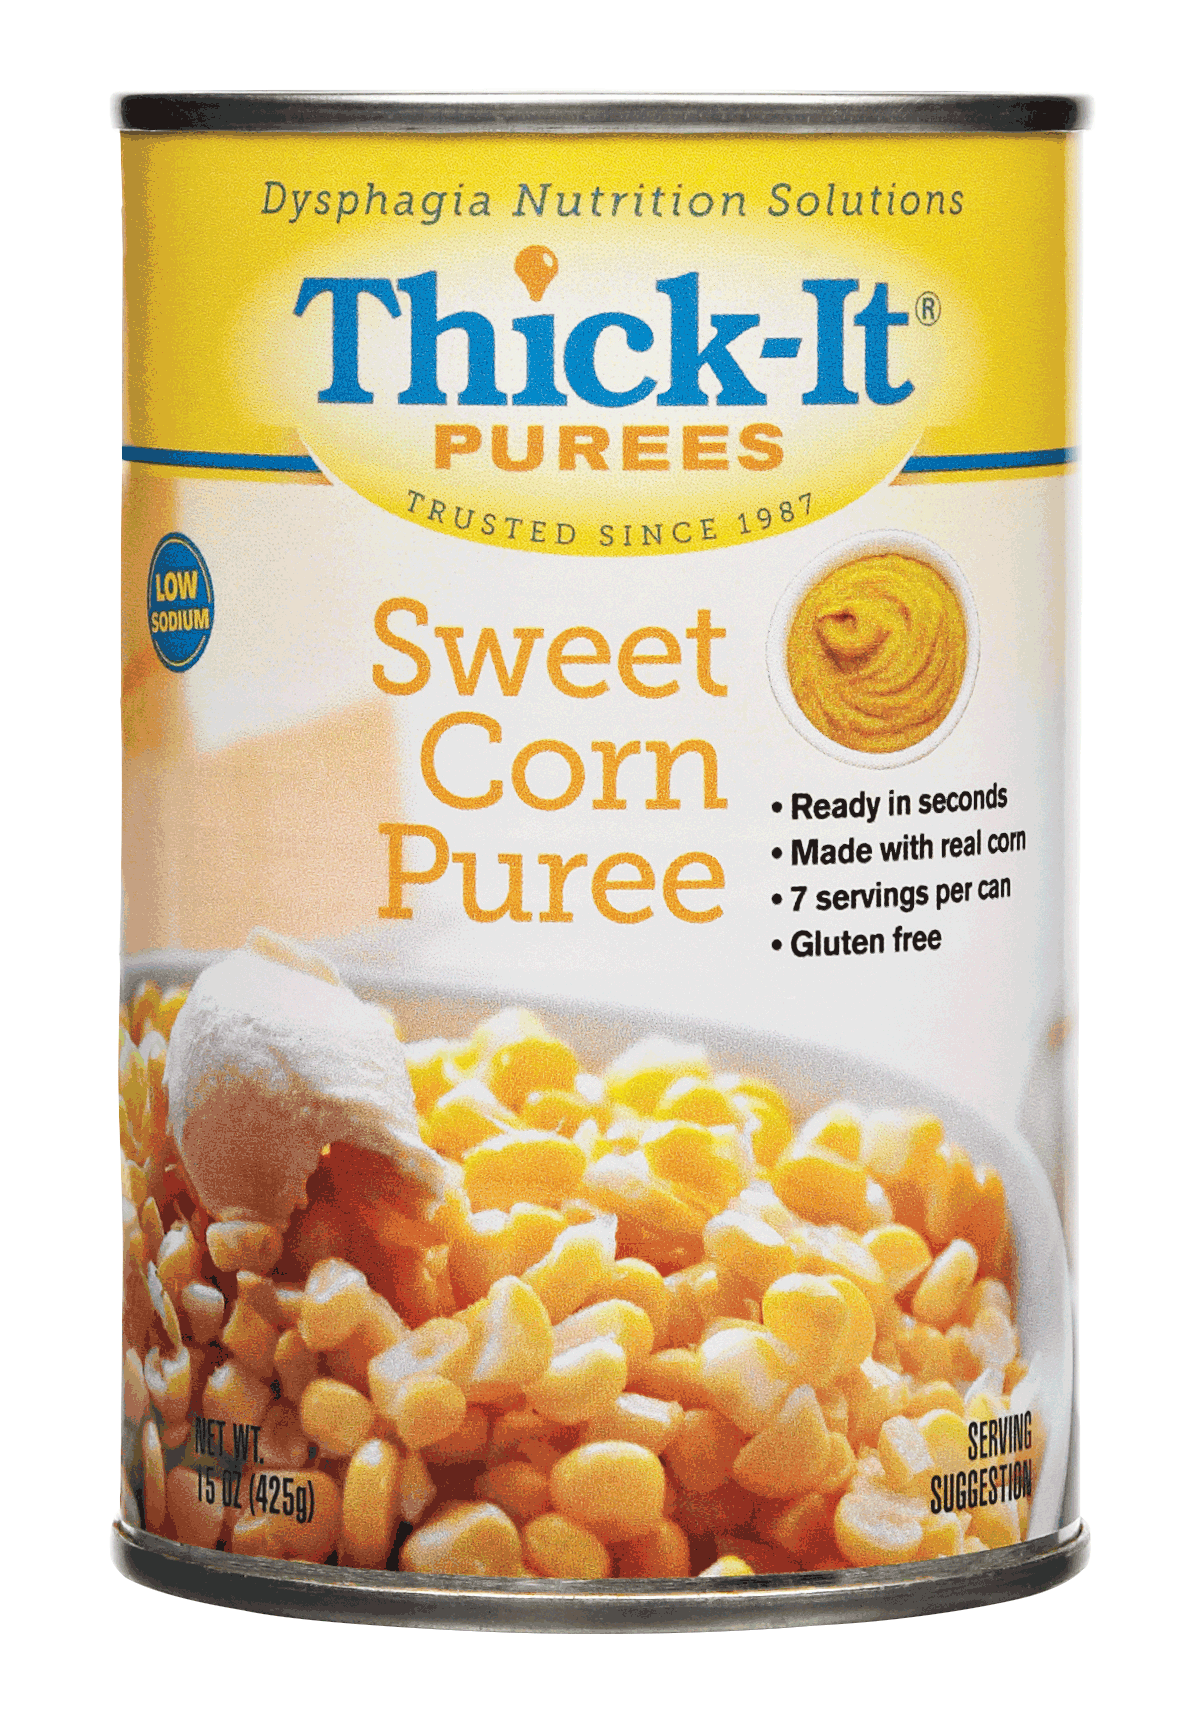 EA/1 - Thick-It Sweet Corn Puree 15 oz. - Best Buy Medical Supplies